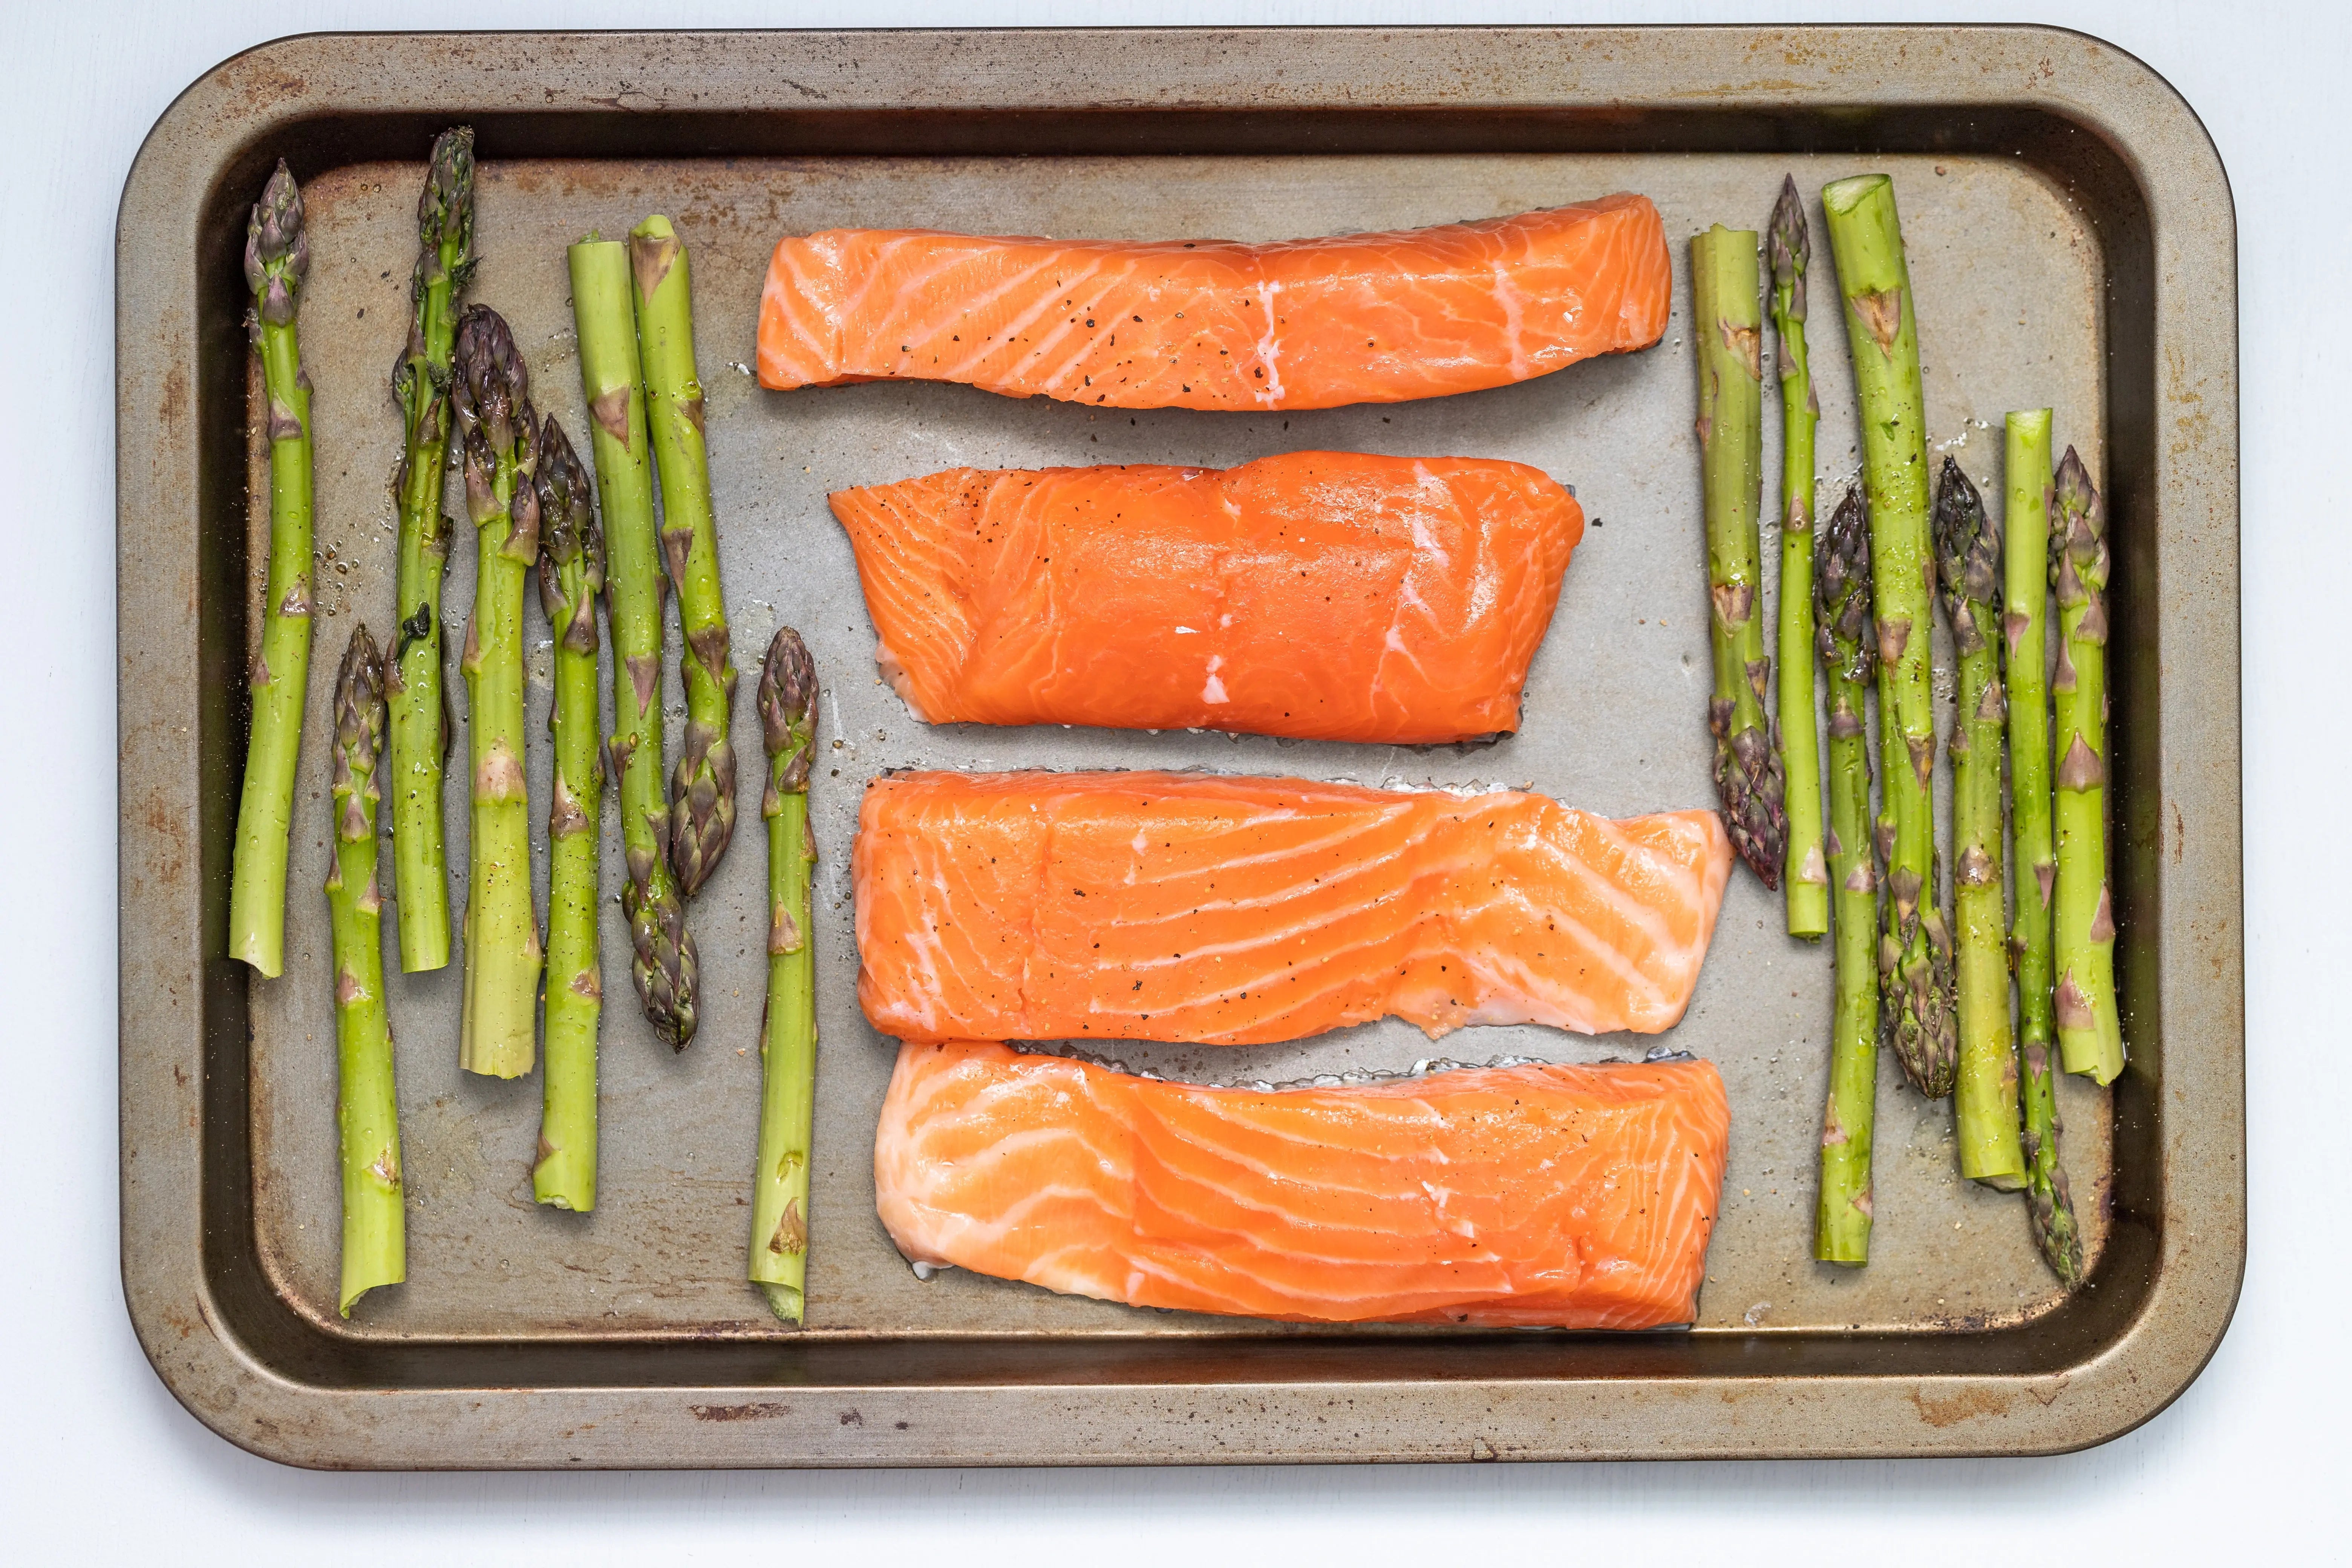 The-Chilled-Chronicles-How-Long-Can-You-Safely-Store-Cooked-Salmon-in-the-Fridge | Fridge.com